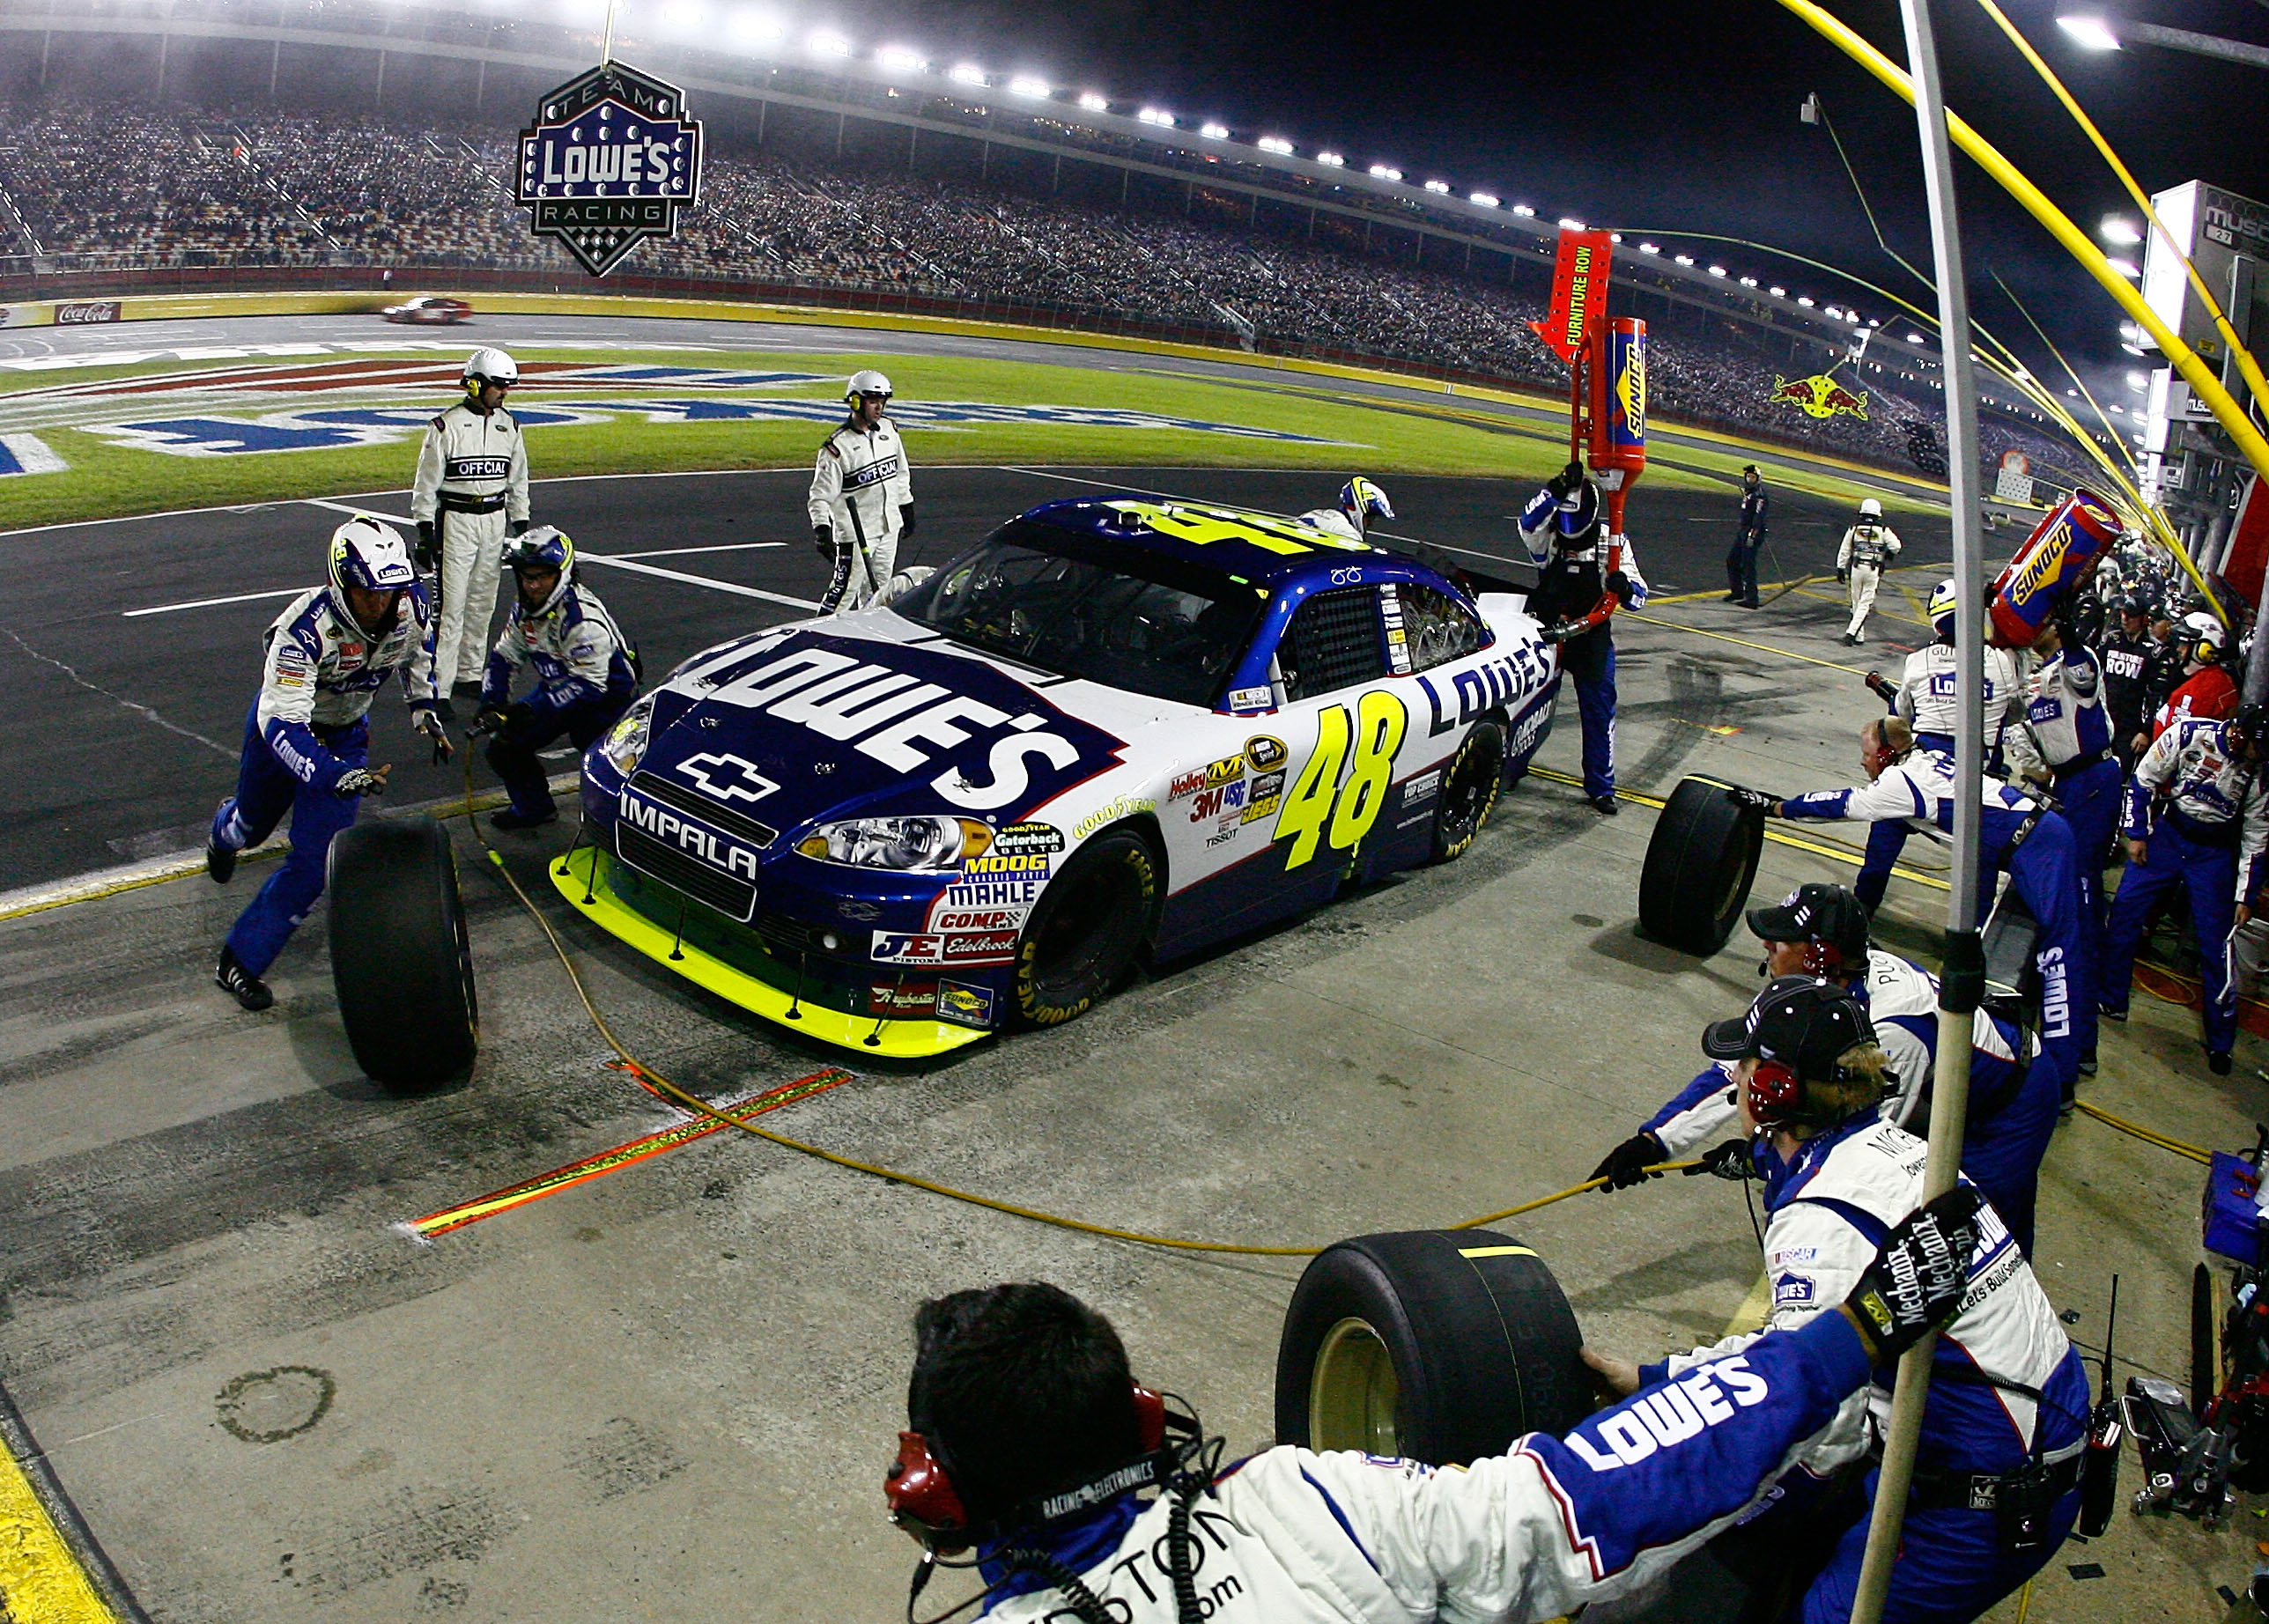 CONCORD, NC - OCTOBER 16:  Jimmie Johnson, driver of the #48 Lowe's Chevrolet, pits during the NASCAR Sprint Cup Series Bank of America 500 at Charlotte Motor Speedway on October 16, 2010 in Concord, North Carolina.  (Photo by Jason Smith/Getty Images for